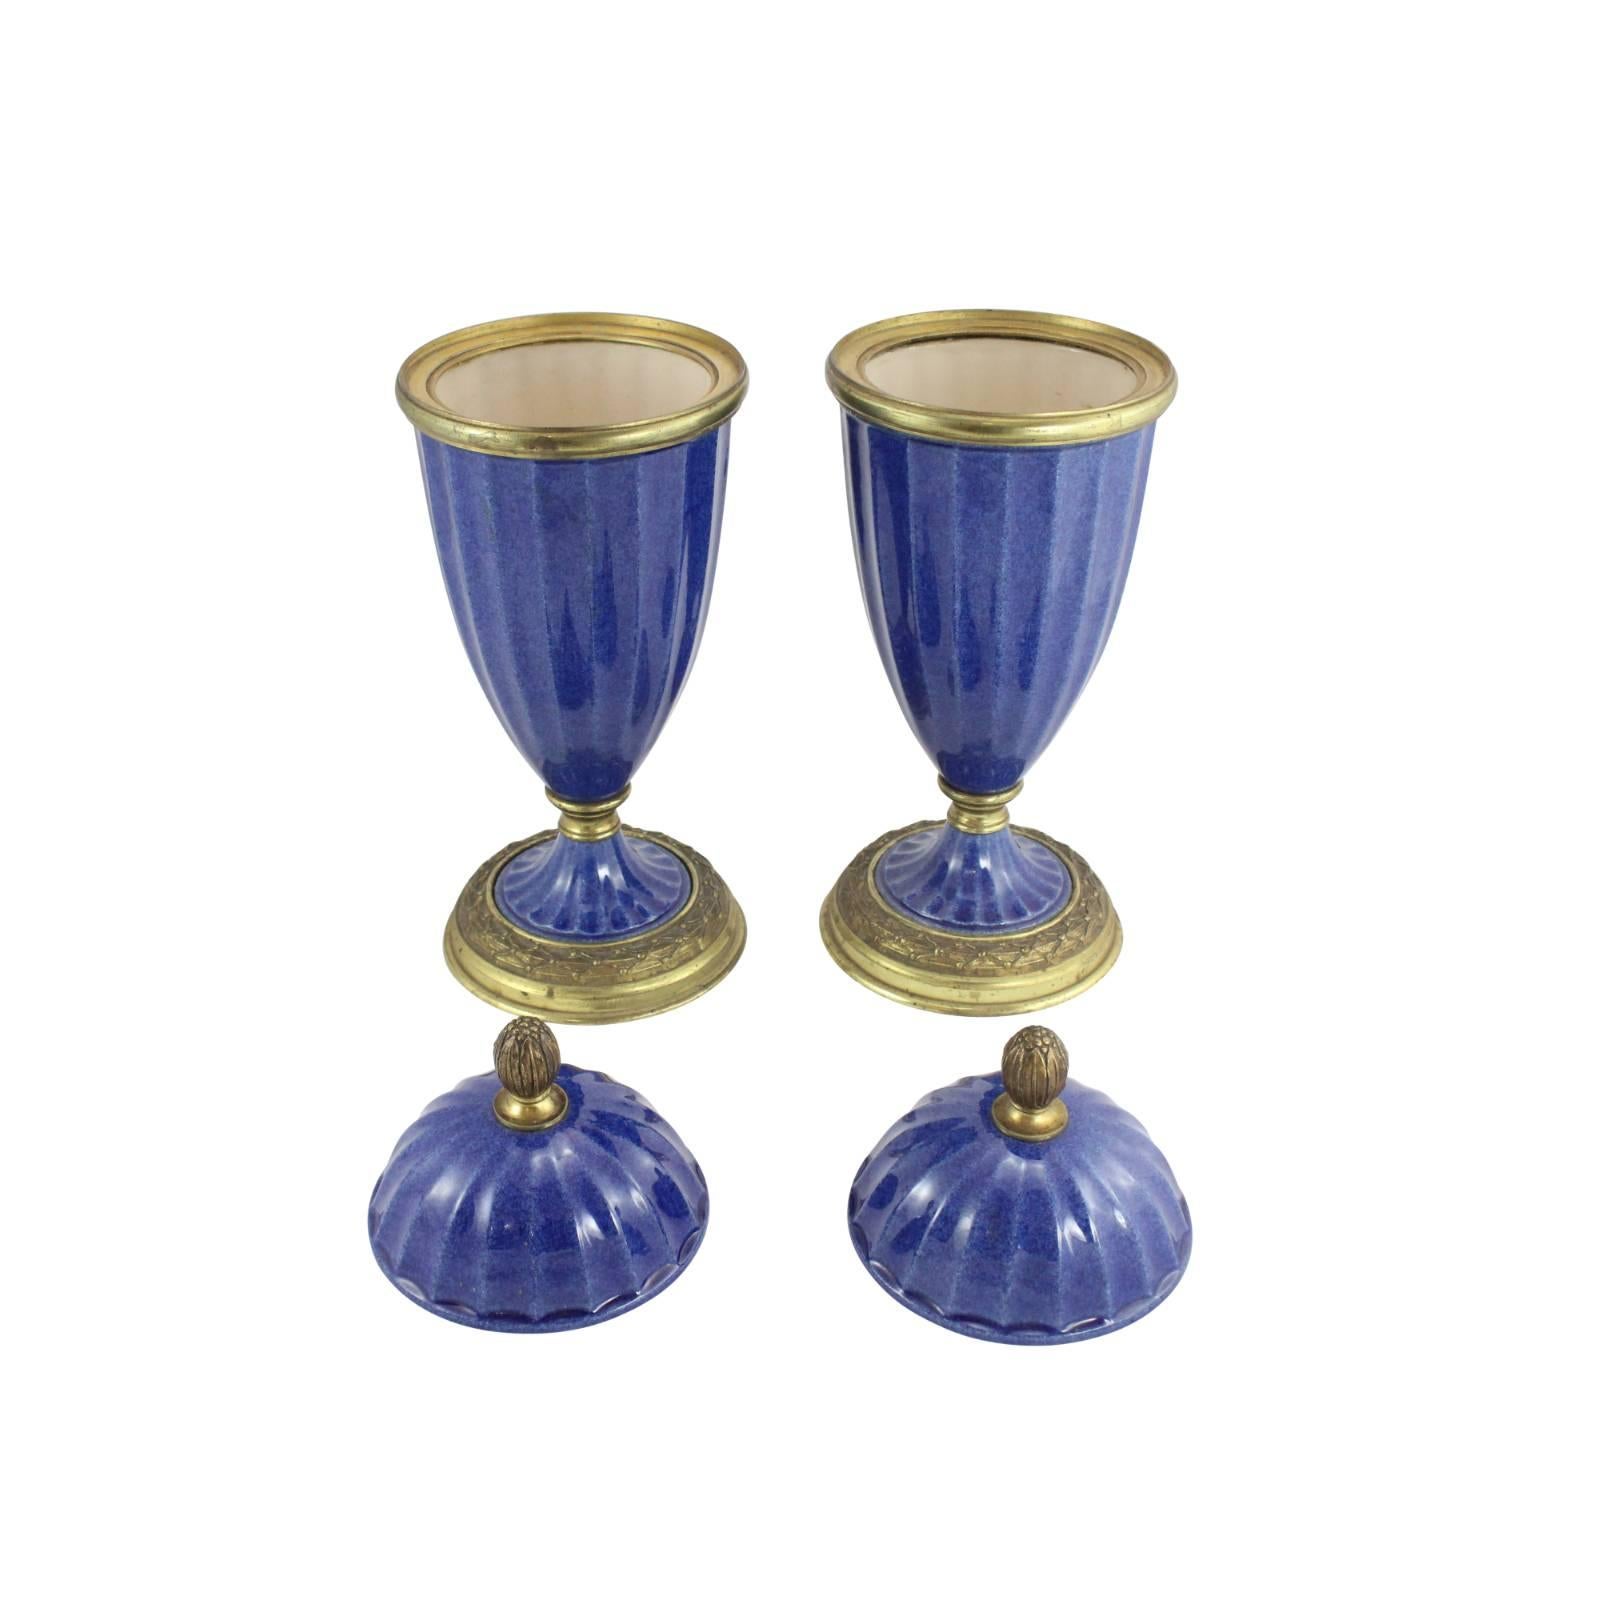 20th Century Pair of Garniture in Lapis Blue by Paul Milet for Sevres